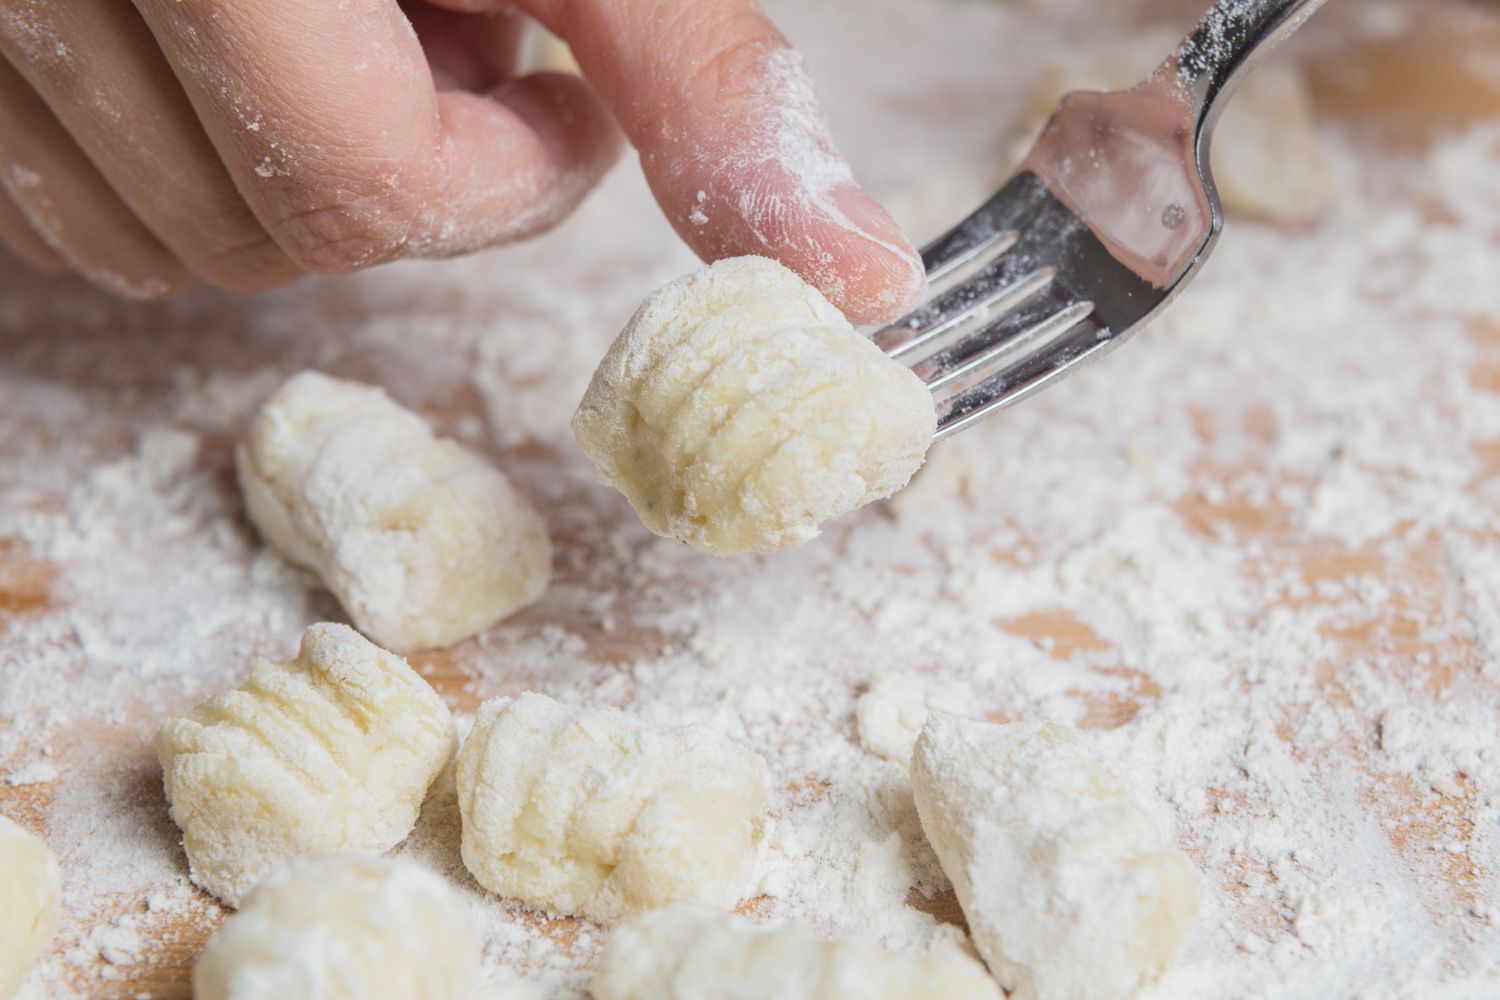 try-this-at-home-how-to-make-gnocchi